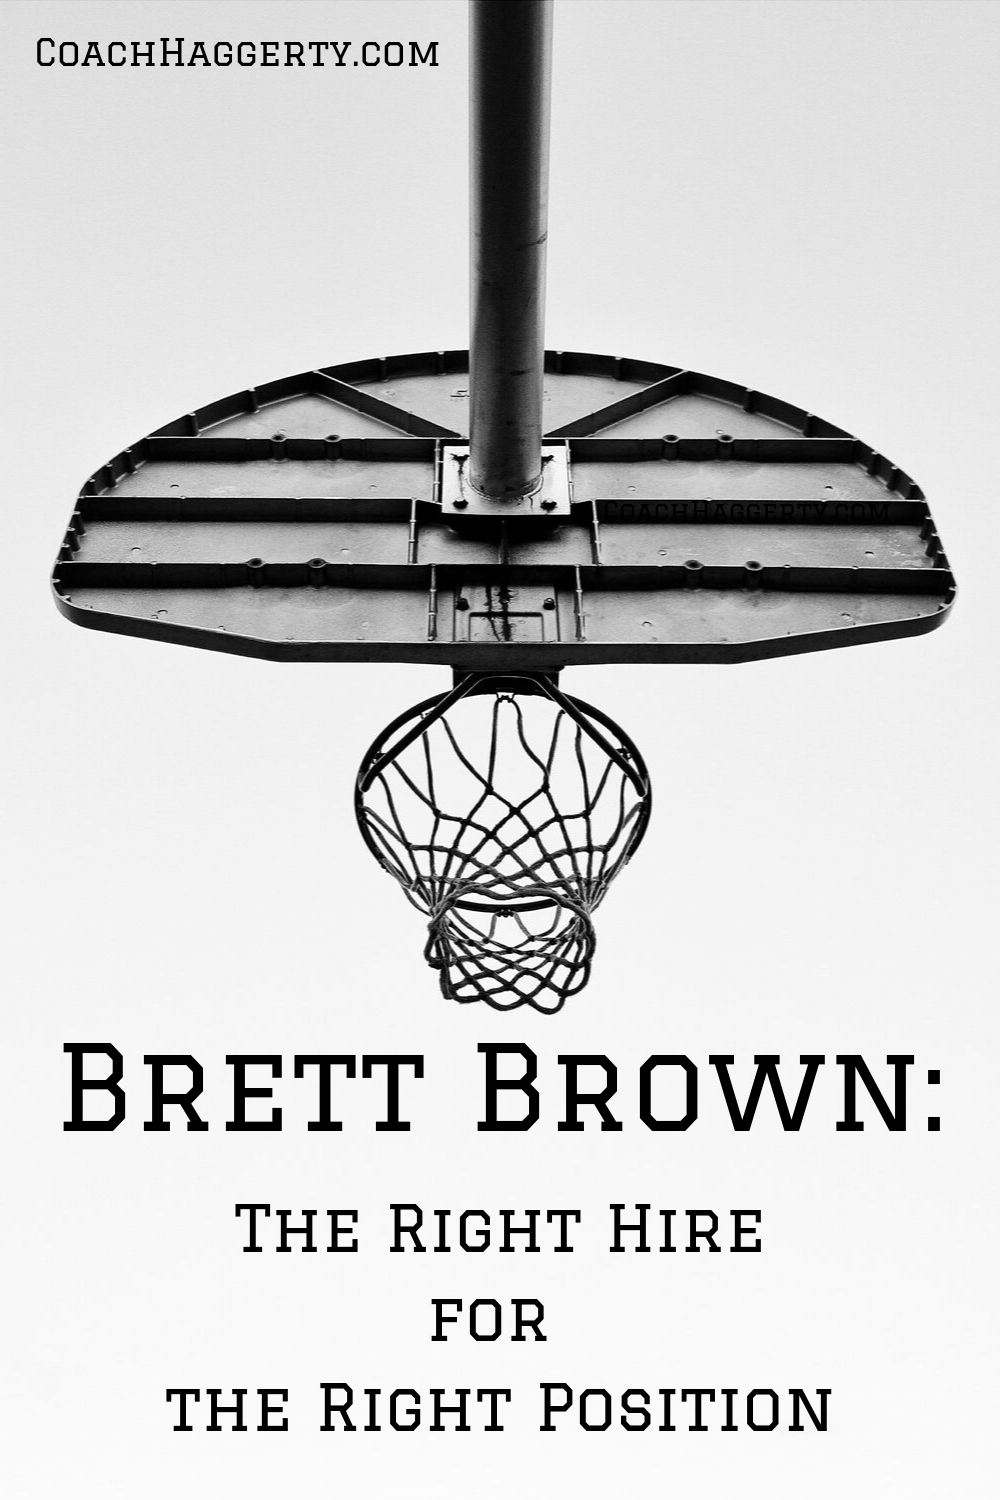 Looking back on 6 years of Brett Brown, Head Coach of the Philadelphia 76ers. Why he was the Right Hire for the Right Position at the Time. | @CoachHaggerty